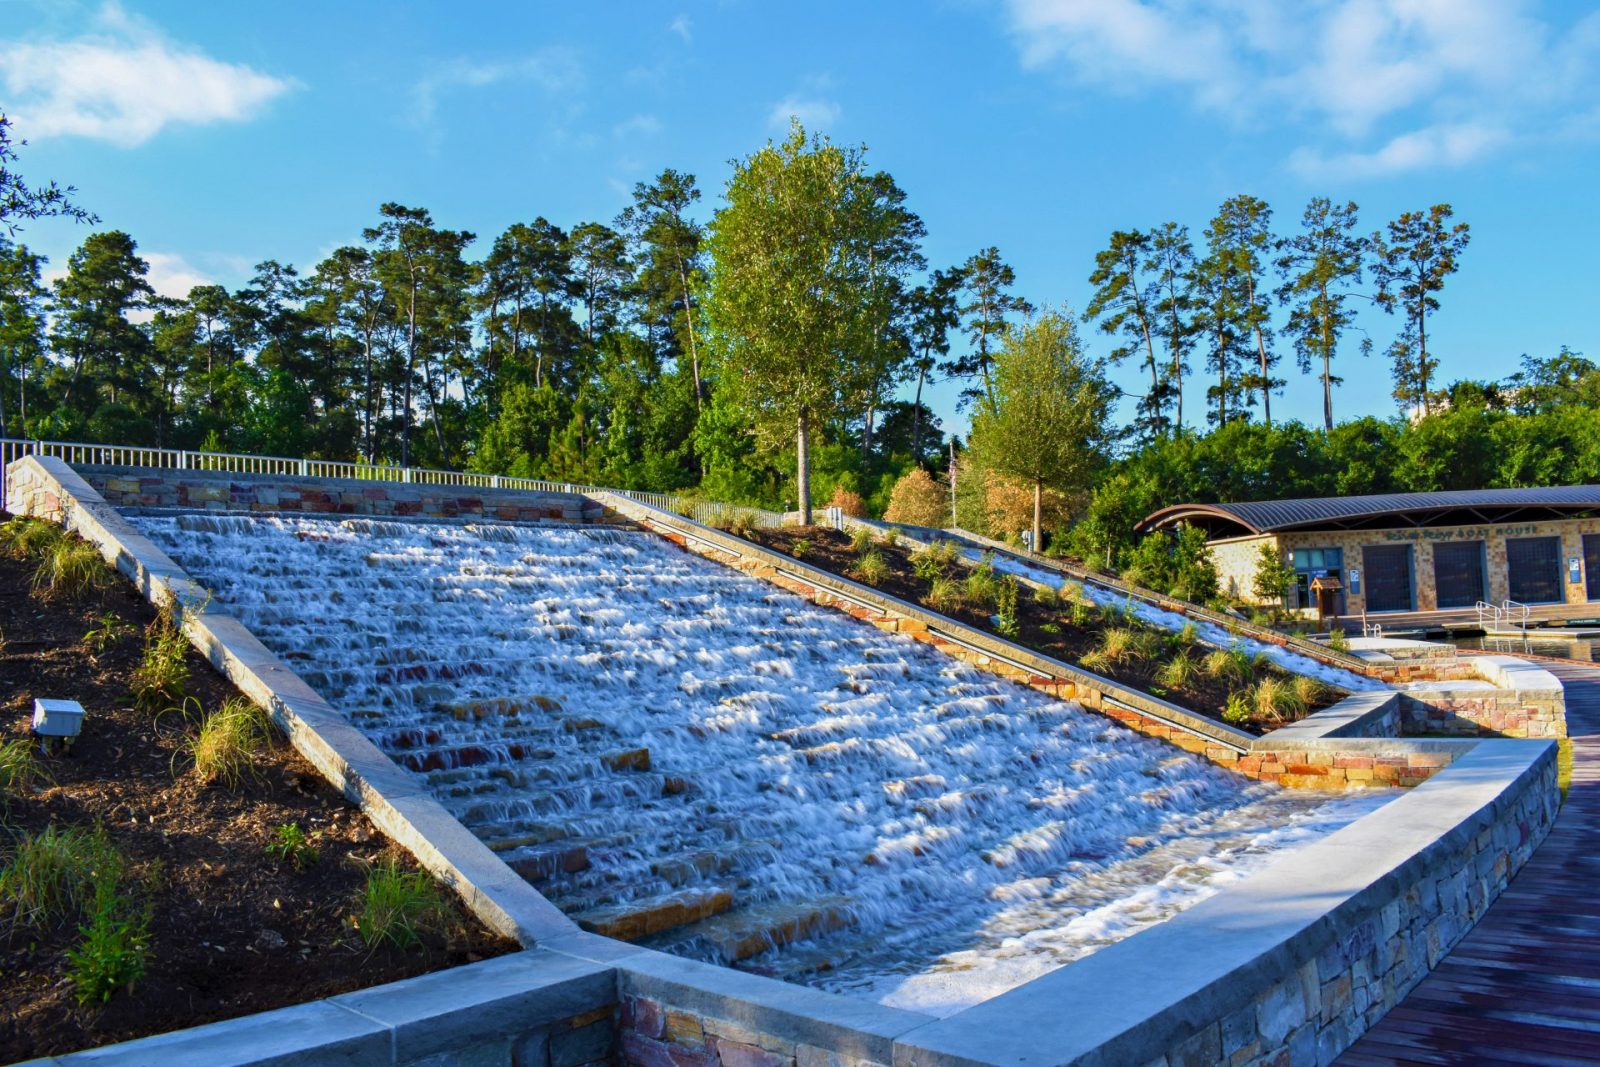 The Woodlands Waterway Turning Basin